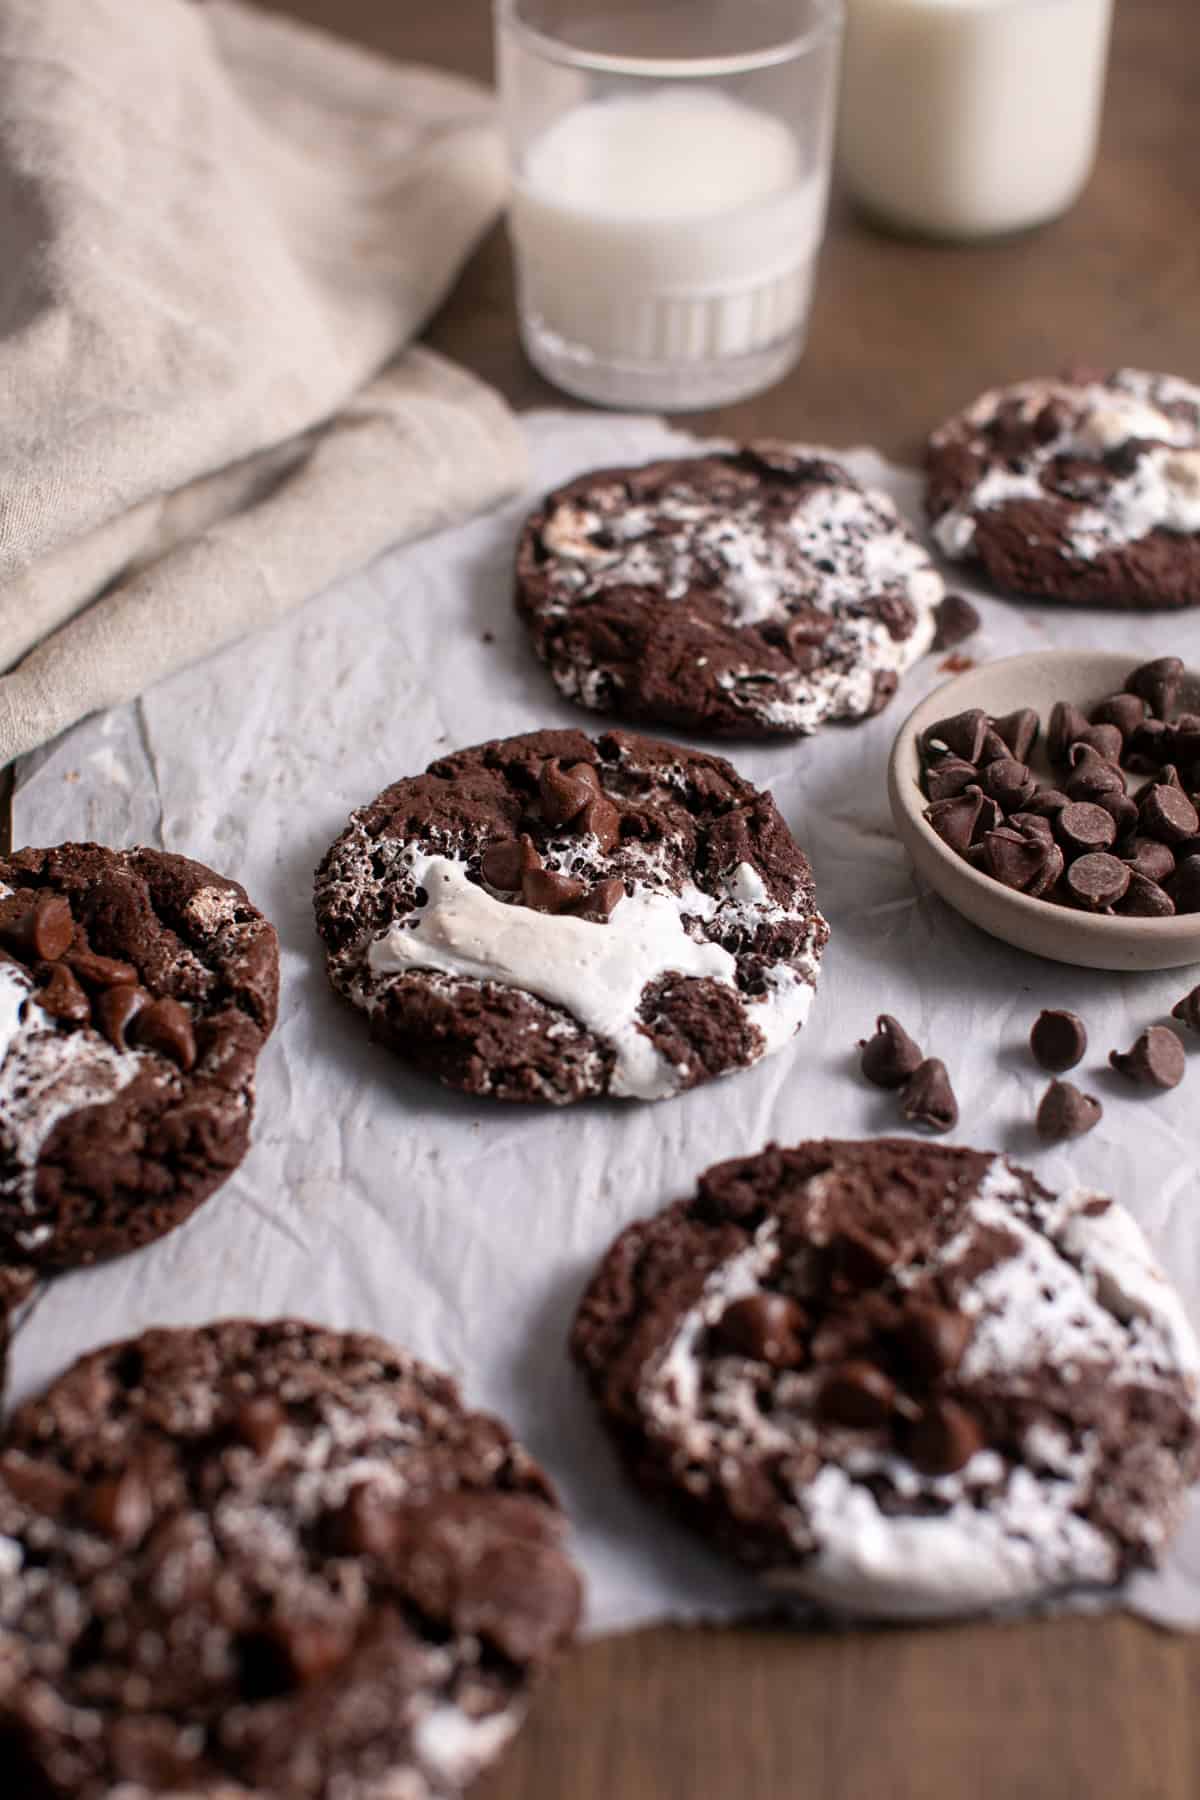 Hot Chocolate cookies sitting by a glass of milk.